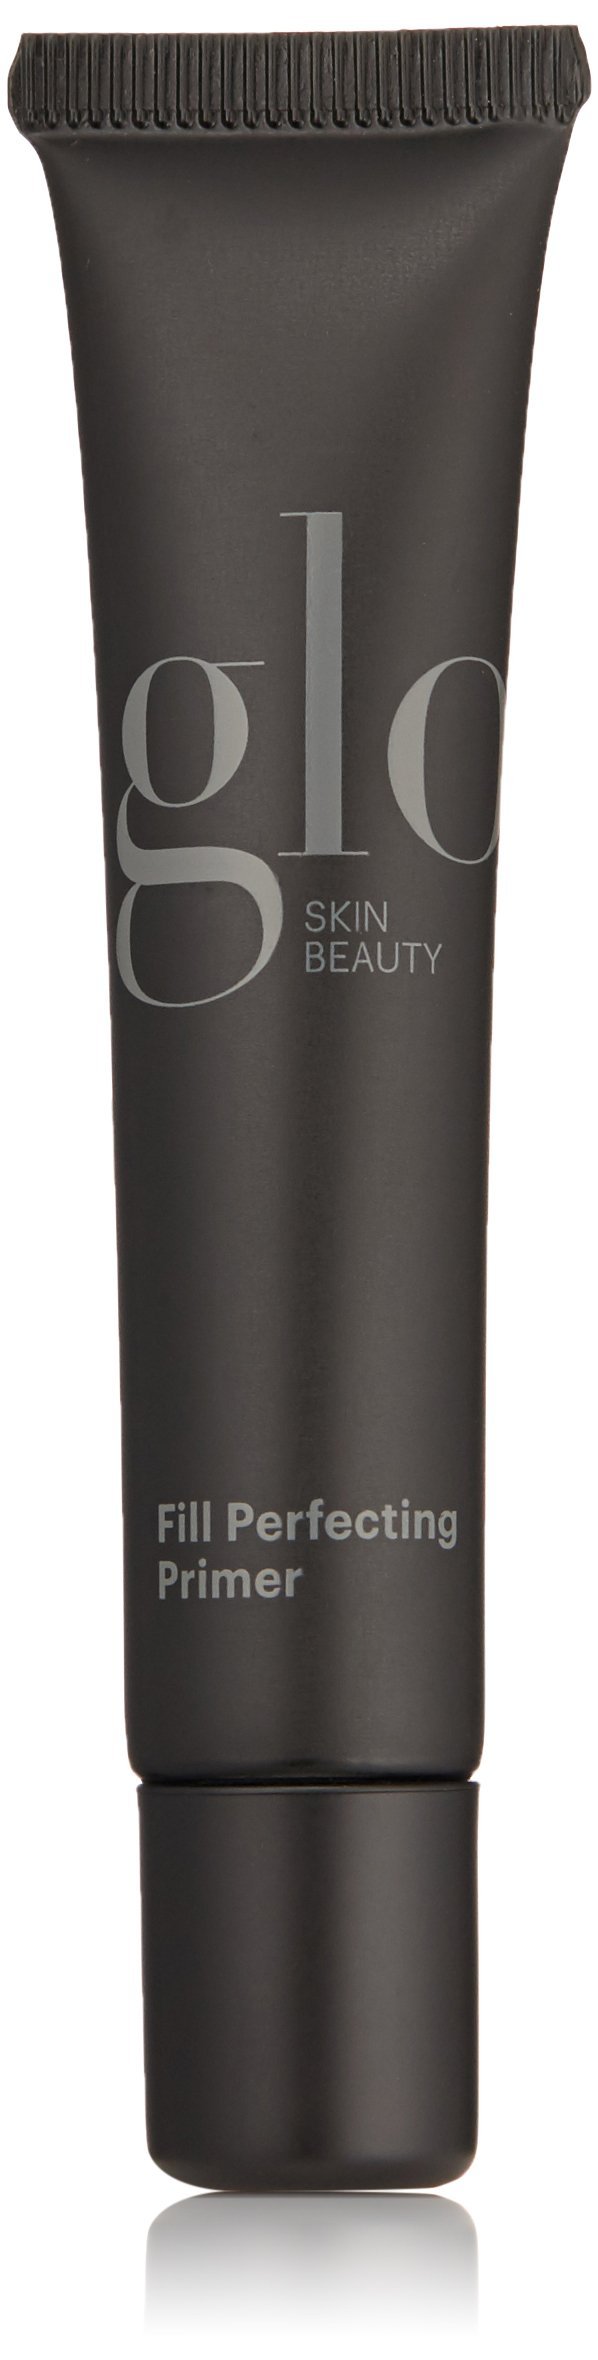 Glo Skin Beauty Fill Perfecting Primer - Silicone Based Mineral Makeup Primer for Wrinkles and Fine Lines - BeesActive Australia